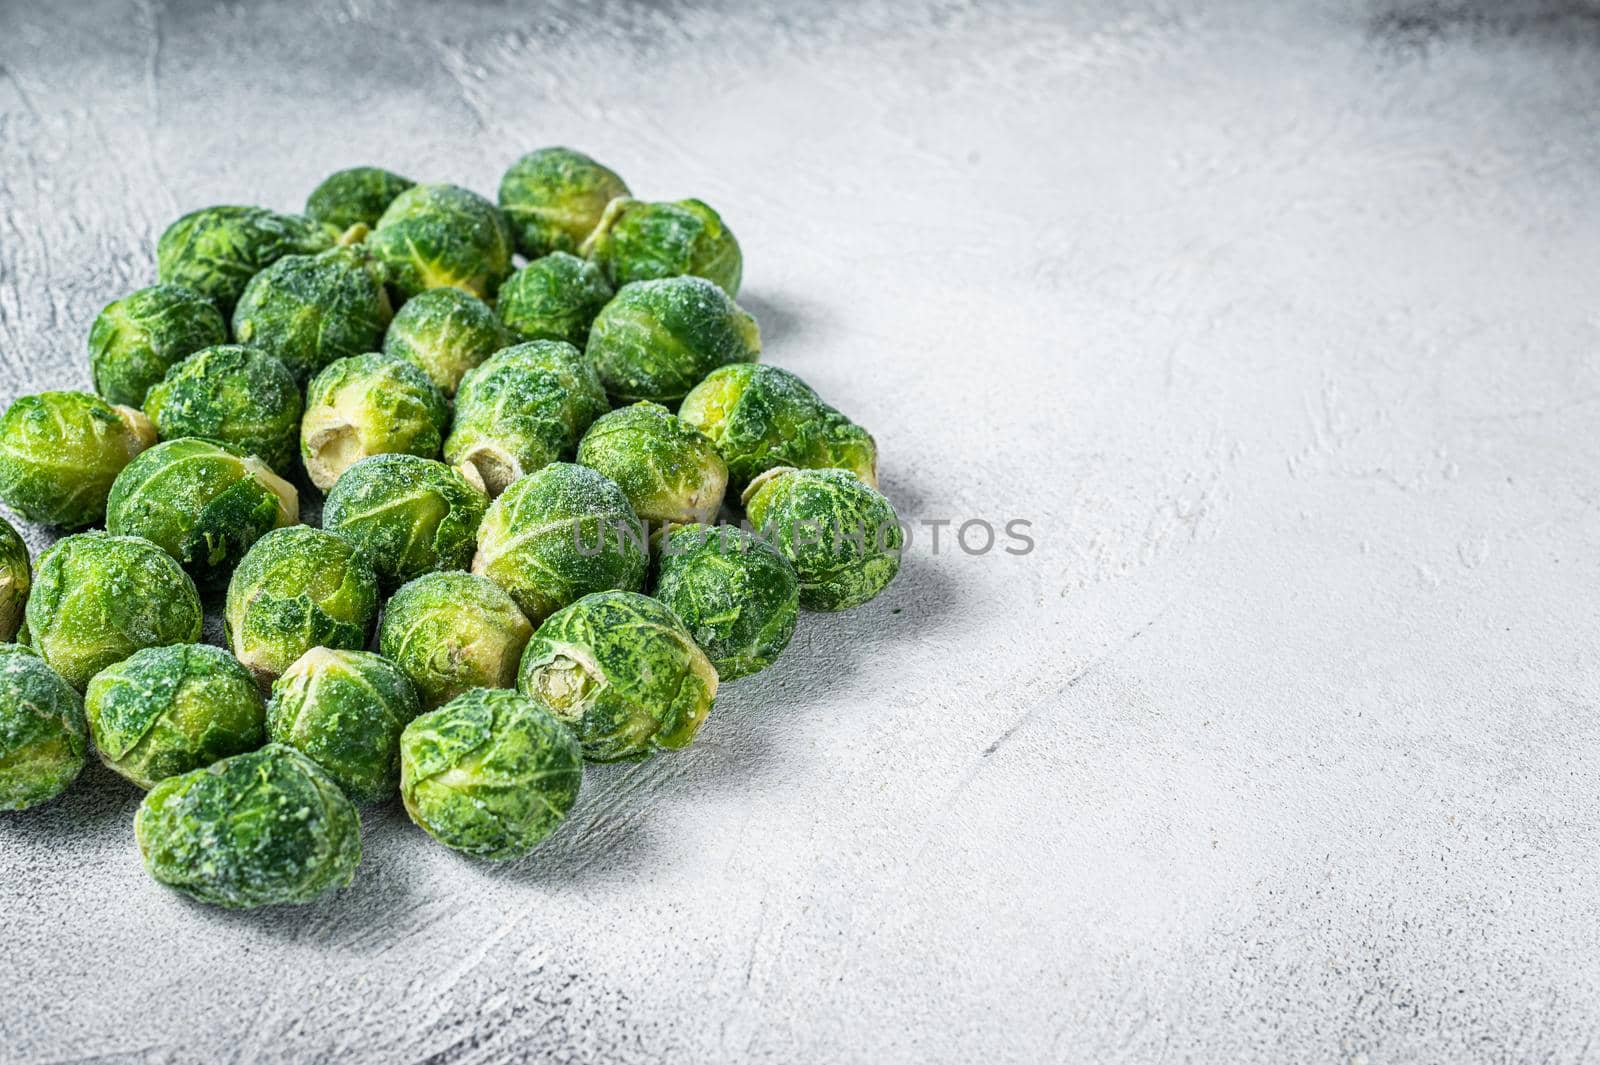 Frozen Brussels sprouts green cabbage on kitchen table. White background. Top view. Copy space by Composter